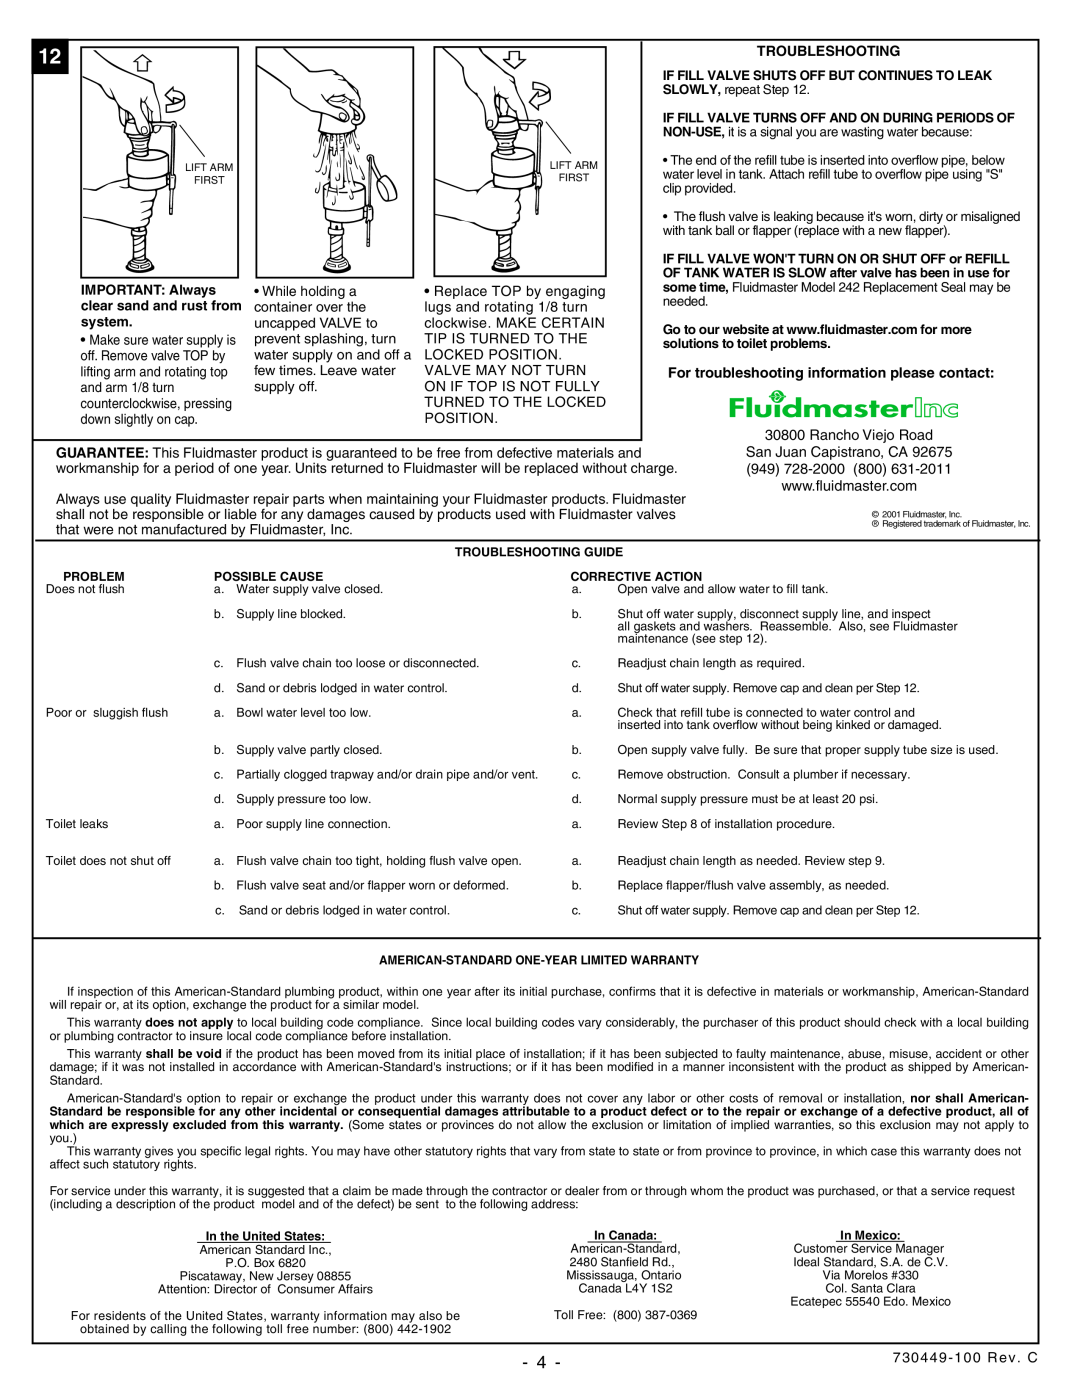 American Standard 2071.016 installation instructions Troubleshooting, For troubleshooting information please contact 